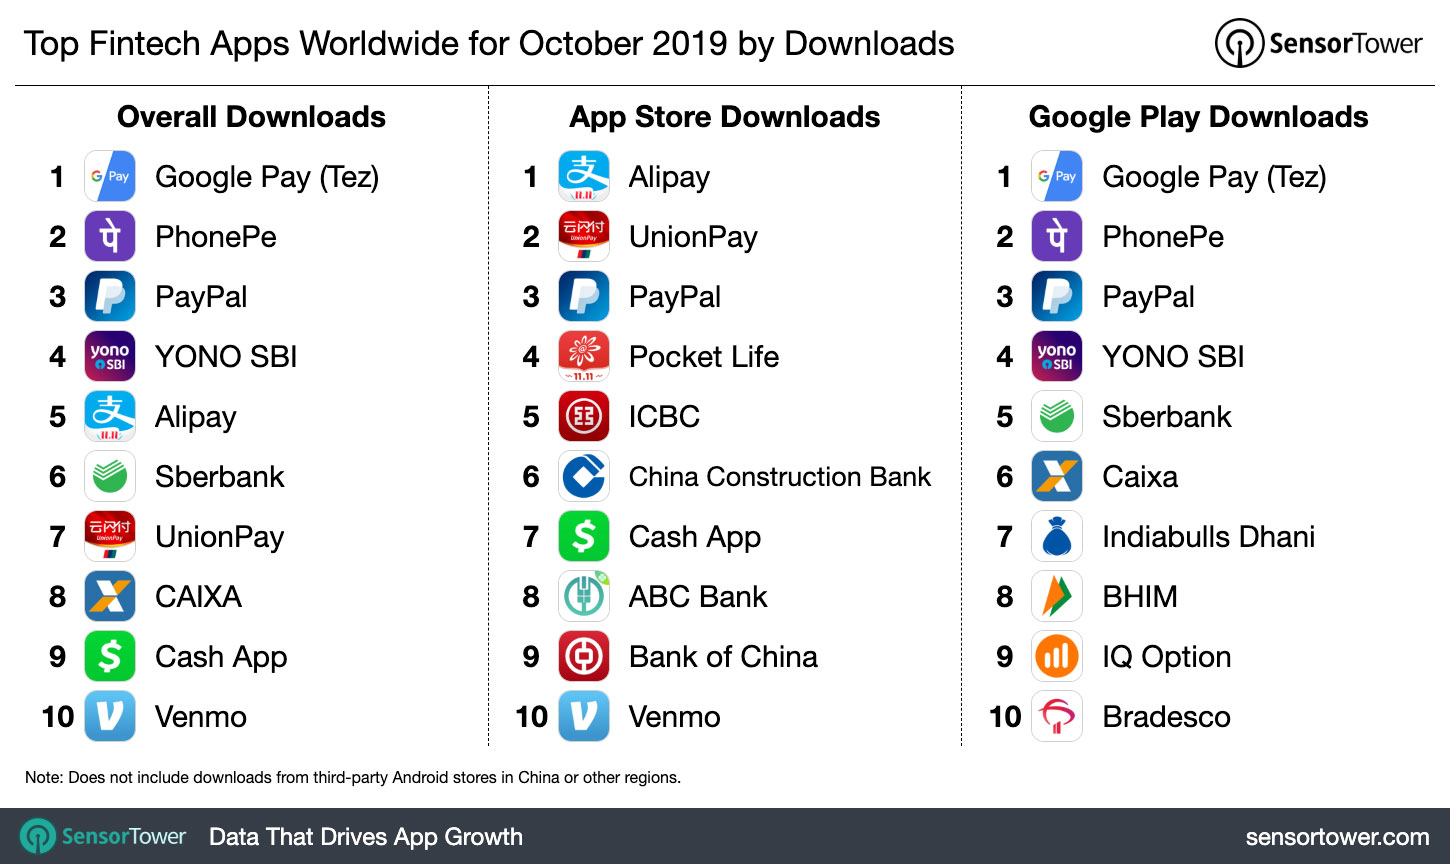 Top Fintech Apps Worldwide for October 2019 by Downloads